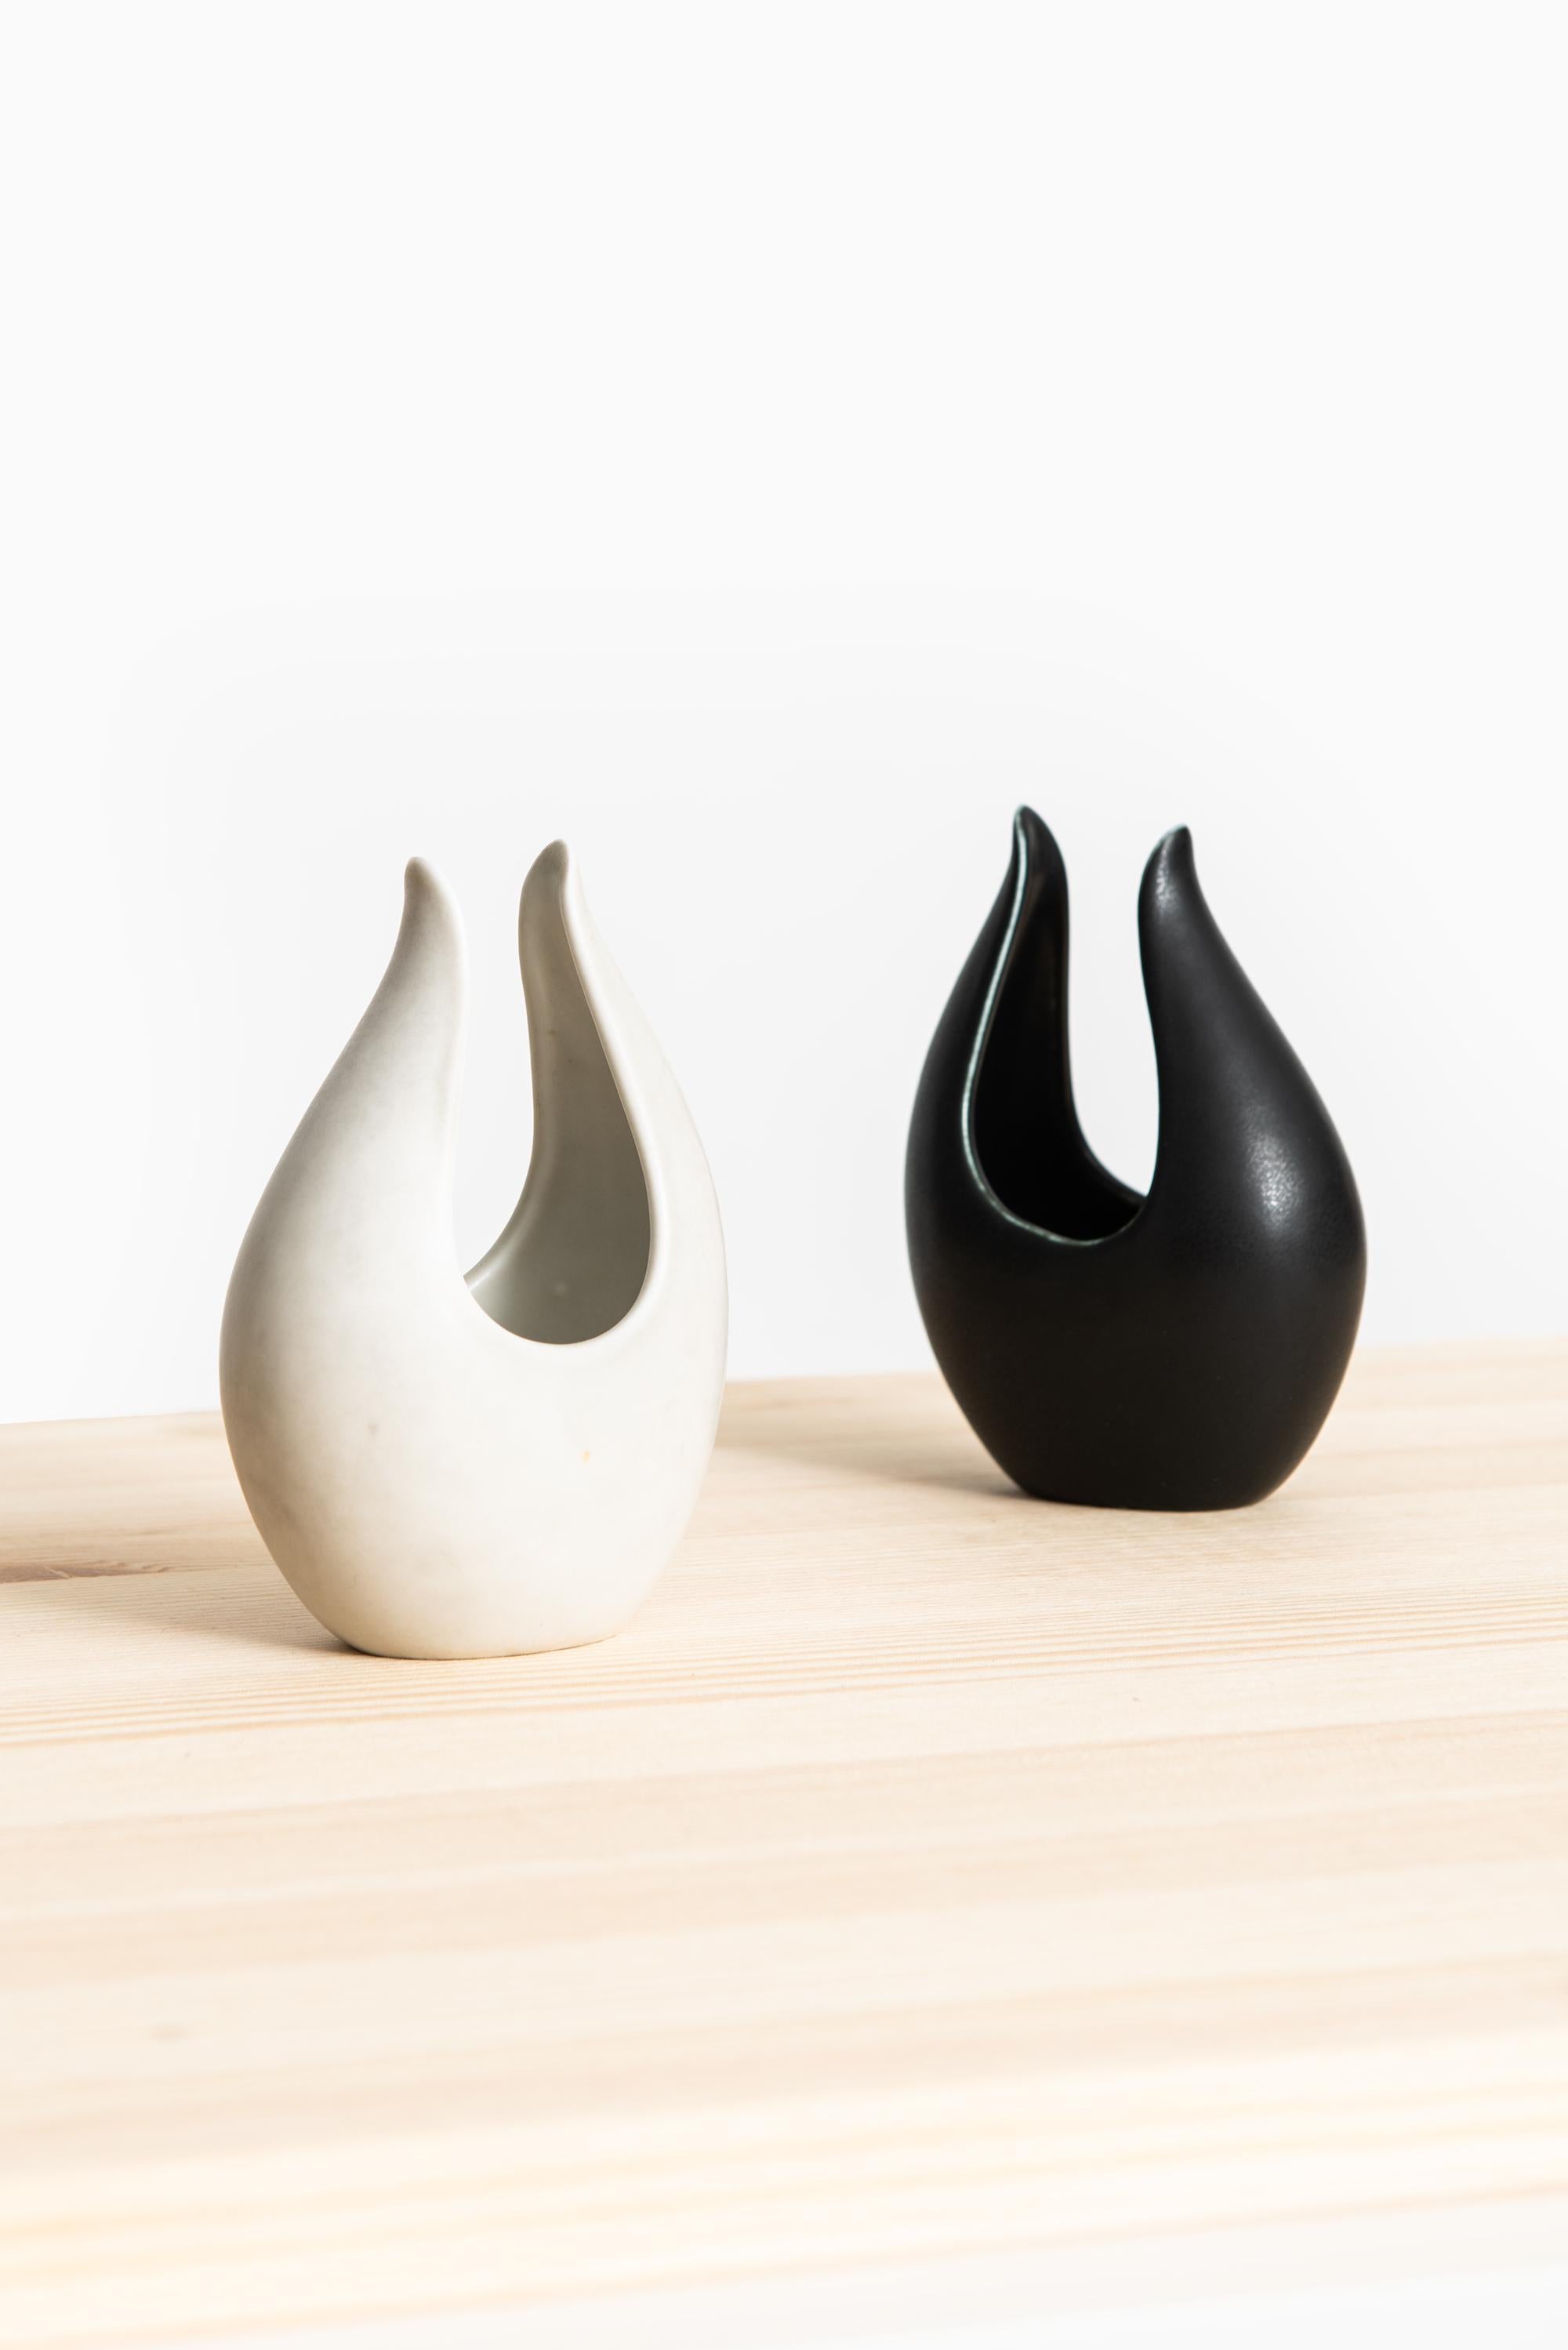 Pair of Caolina ceramic vases designed by Gunnar Nylund. Produced by Rörstrand in Sweden.